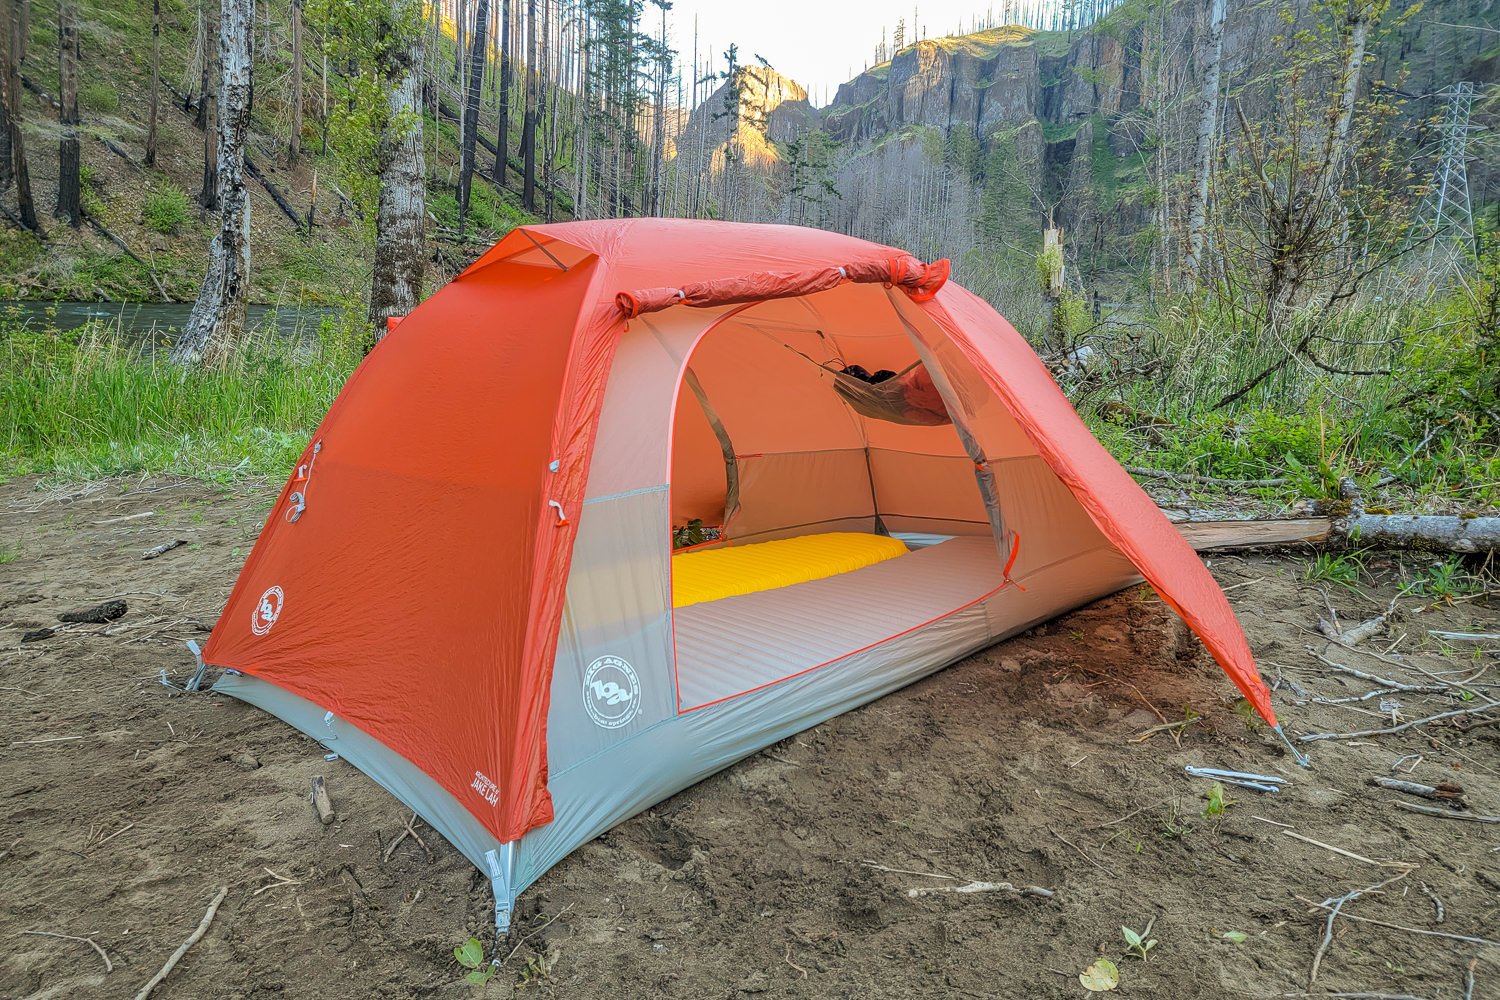 The Copper Spur with the rainfly pitched over the mesh tent body